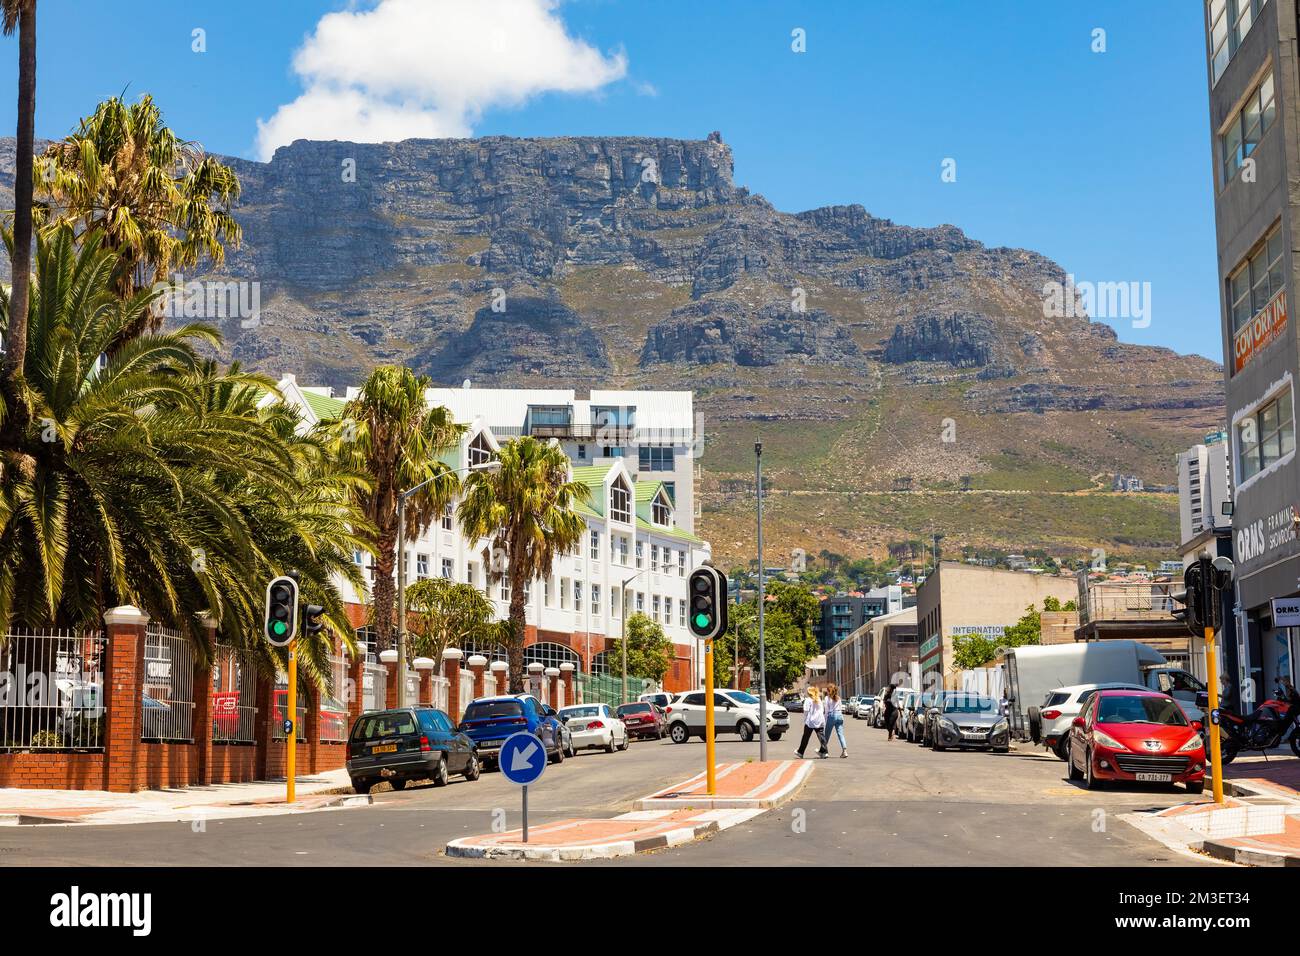 Cape Town, South Africa - December 7, 2022: Street view of City buildings with Table Mountain in the background Stock Photo